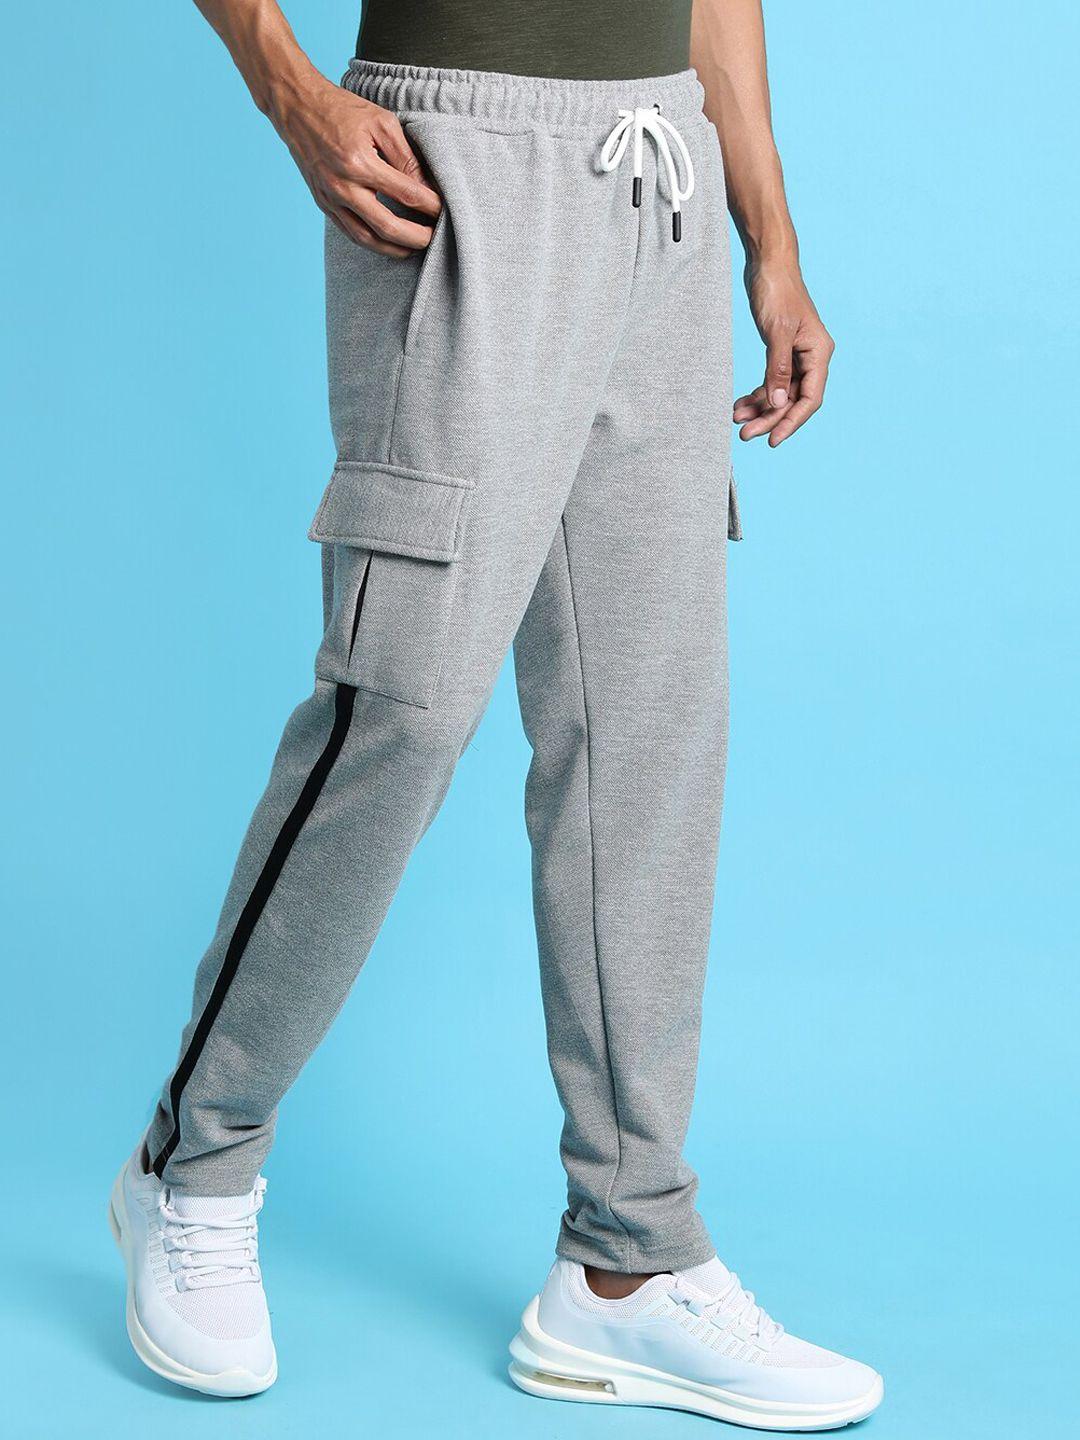 campus-sutra-men-grey-solid-cotton-track-pant